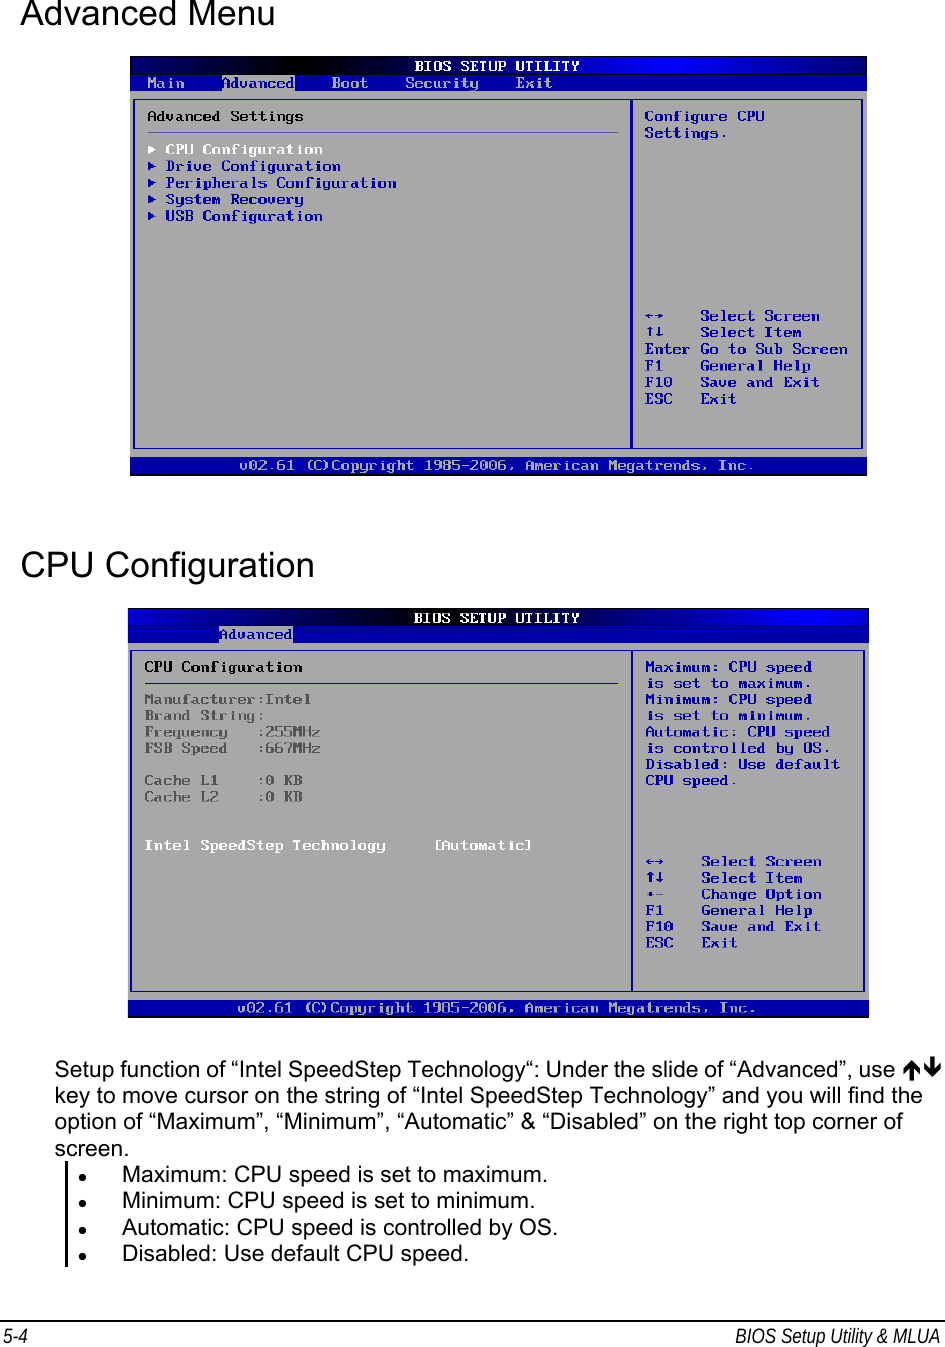 5-4  BIOS Setup Utility &amp; MLUA                                         Advanced Menu    CPU Configuration     Setup function of “Intel SpeedStep Technology“: Under the slide of “Advanced”, use ÏÐ key to move cursor on the string of “Intel SpeedStep Technology” and you will find the option of “Maximum”, “Minimum”, “Automatic” &amp; “Disabled” on the right top corner of screen. z Maximum: CPU speed is set to maximum. z Minimum: CPU speed is set to minimum. z Automatic: CPU speed is controlled by OS. z Disabled: Use default CPU speed. 